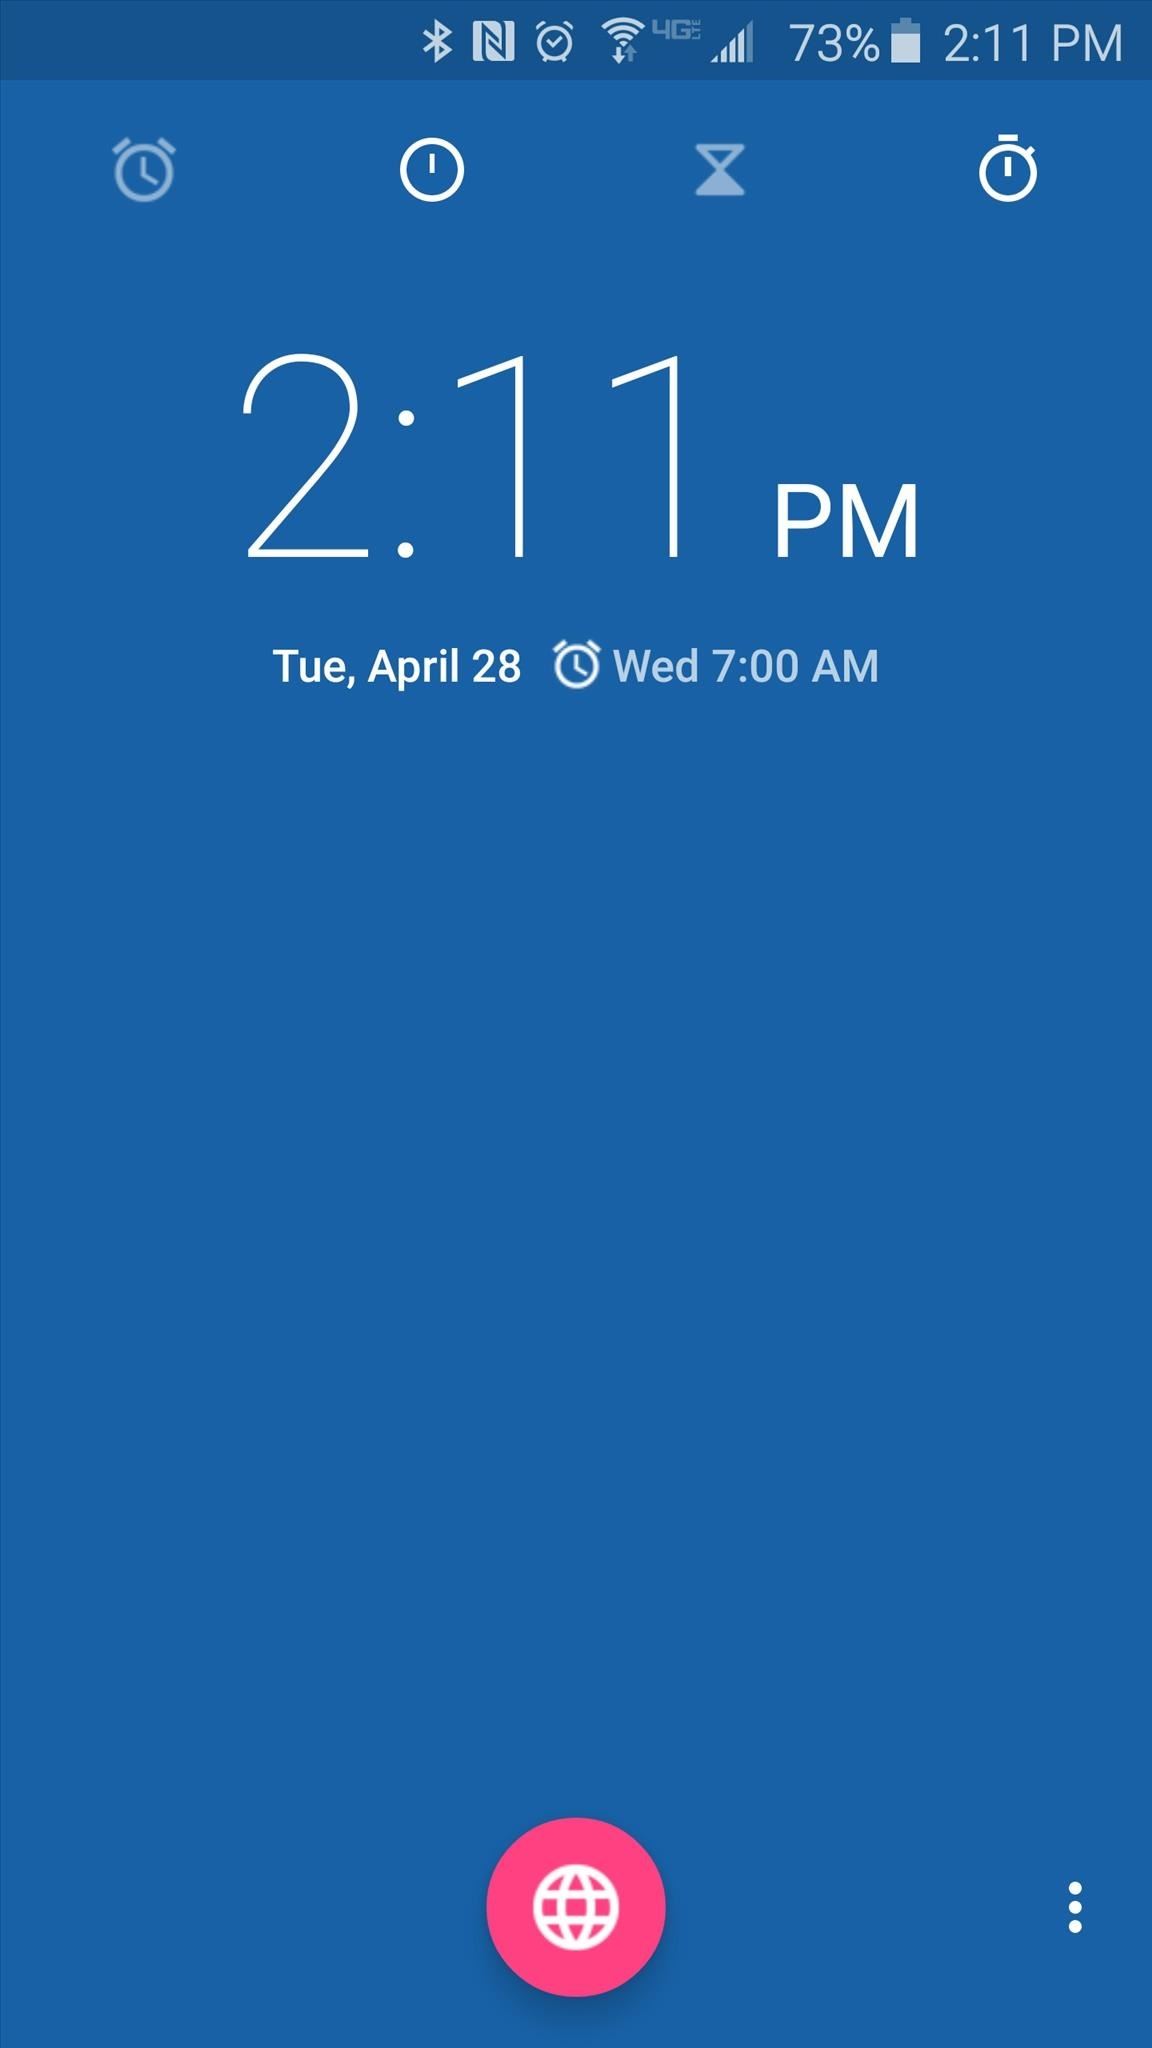 How to Install the Latest Google Clock & Calculator Apps on Your Galaxy S6 (Or Other Android)